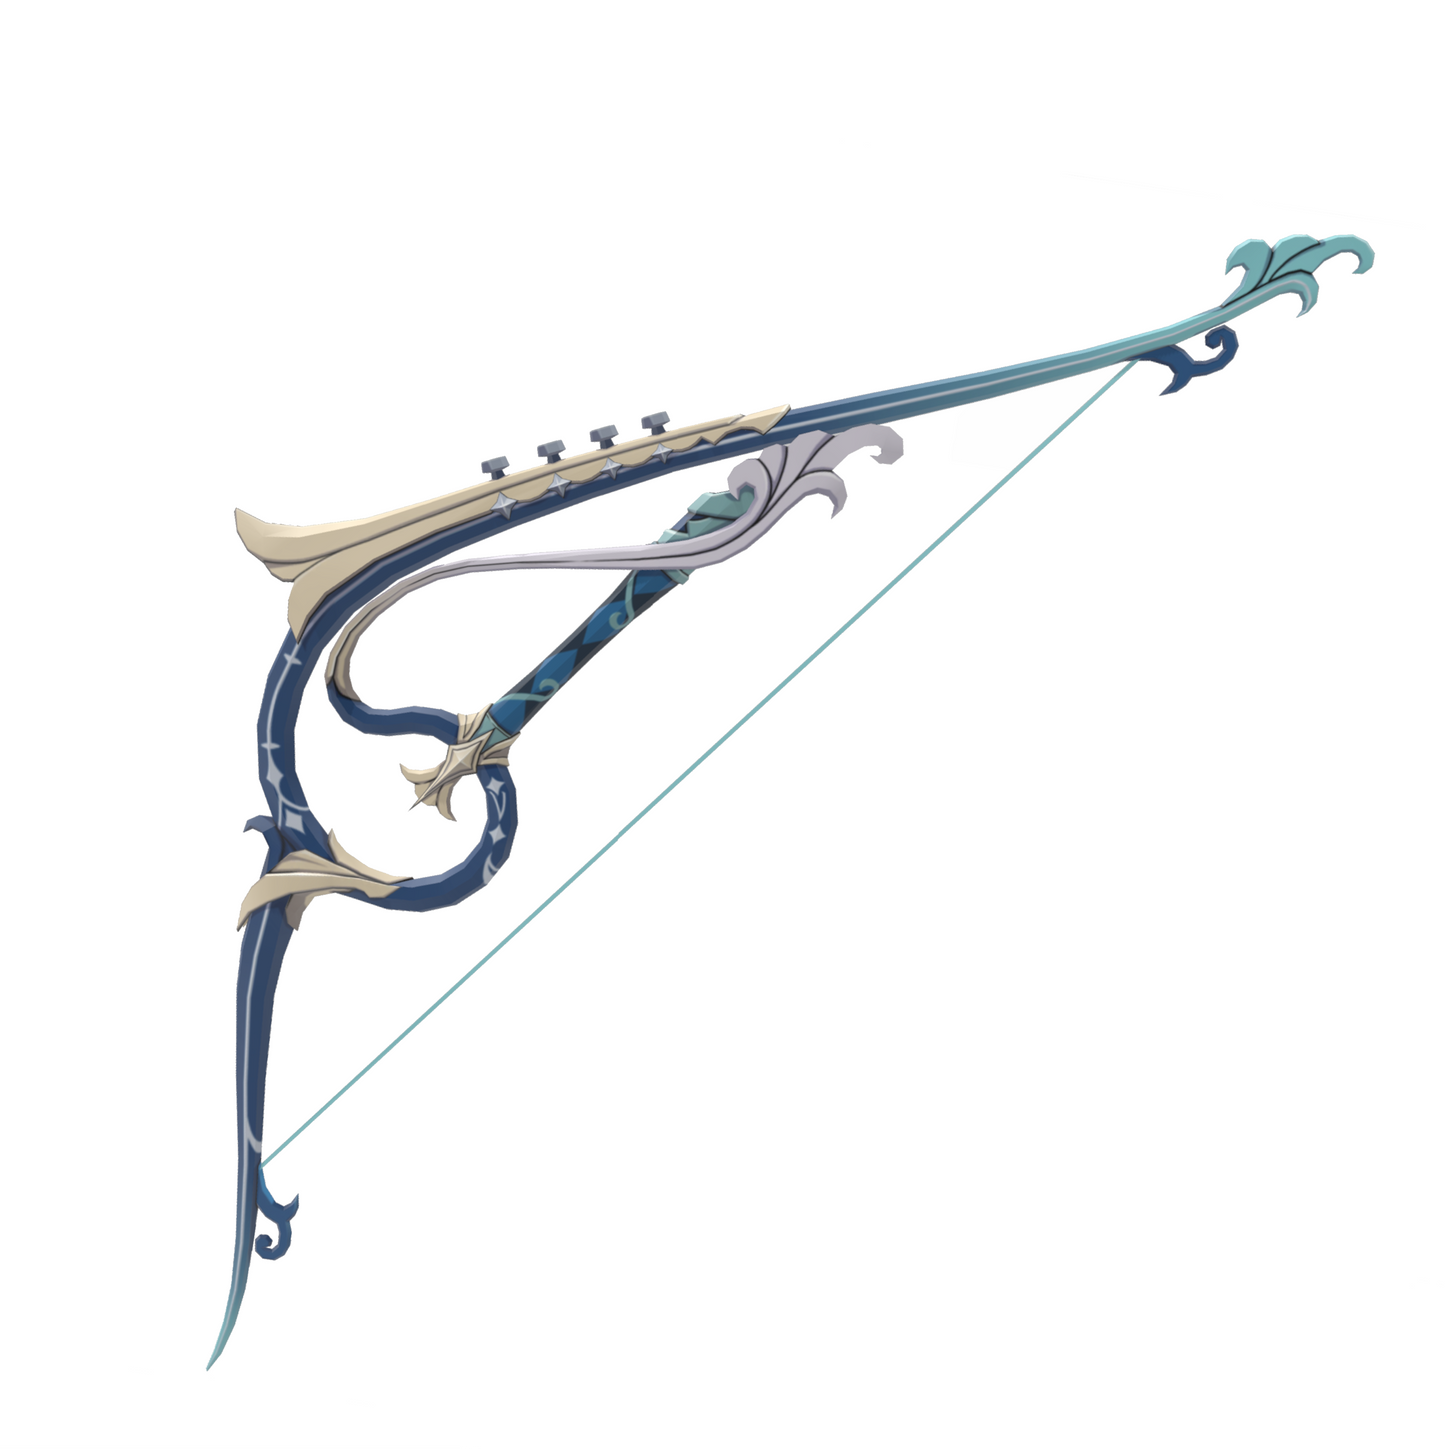 Stringless Bow - Digital 3D Model Files and Physical 3D Printed Kit Options - Venti Cosplay